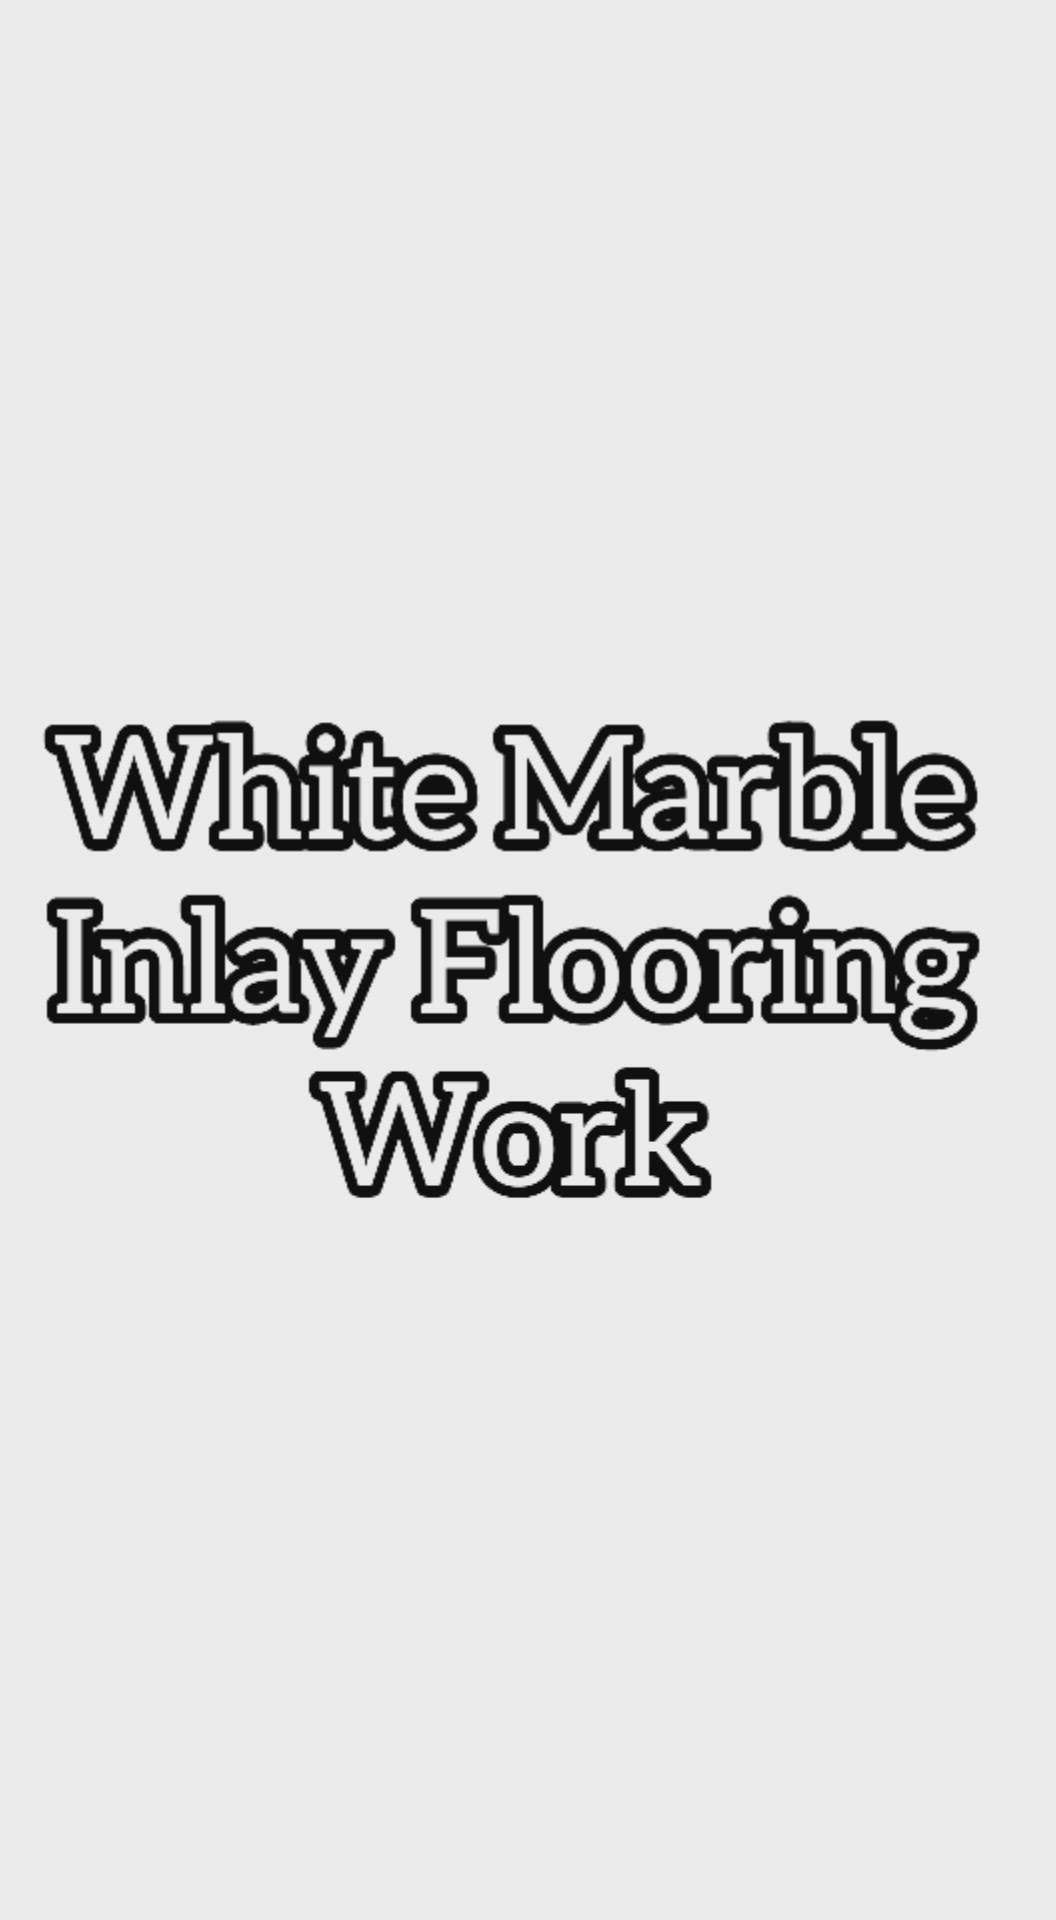 White Marble Inlay Flooring Work

Decor your flooring and Wall Inlay Flooring Work

We are manufacturer of marble and sandstone Inlay Work

We make any design according to your requirement and size

Follow me on instagram
@nbmarble

More Information Contact Me
082330 78099 

#inlay #inlayfurniture #inlaywork #inlayjewelry #nbmarble #floorwork #flooringideas #flooringsolutions #flooringexperts #flooringcompany